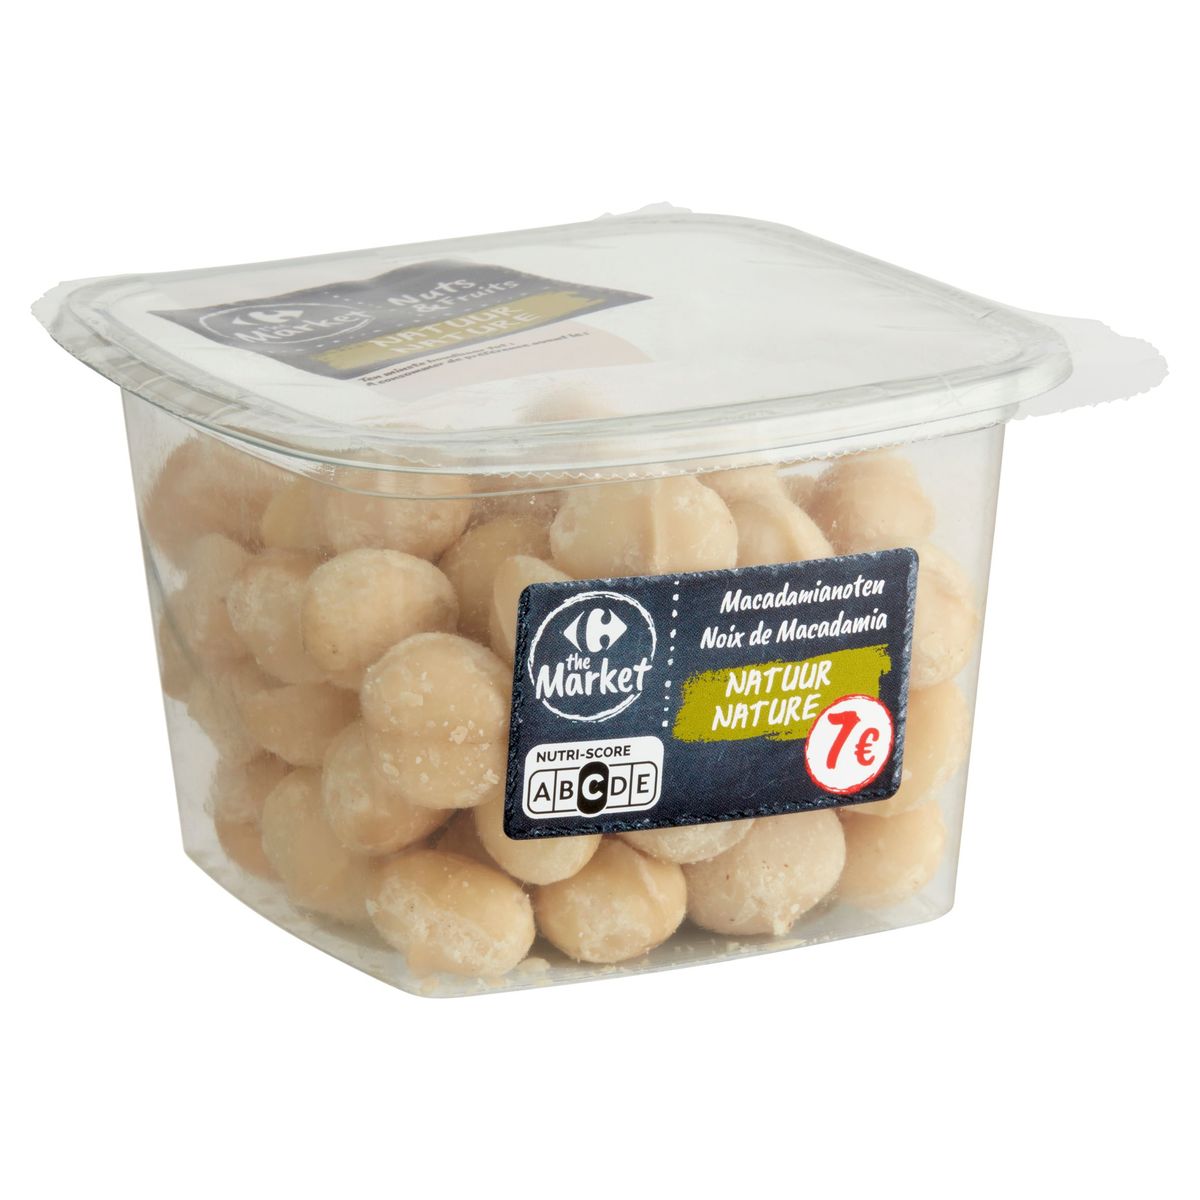 Carrefour The Market Nuts & Fruits Macadamianoten Natuur 150 g